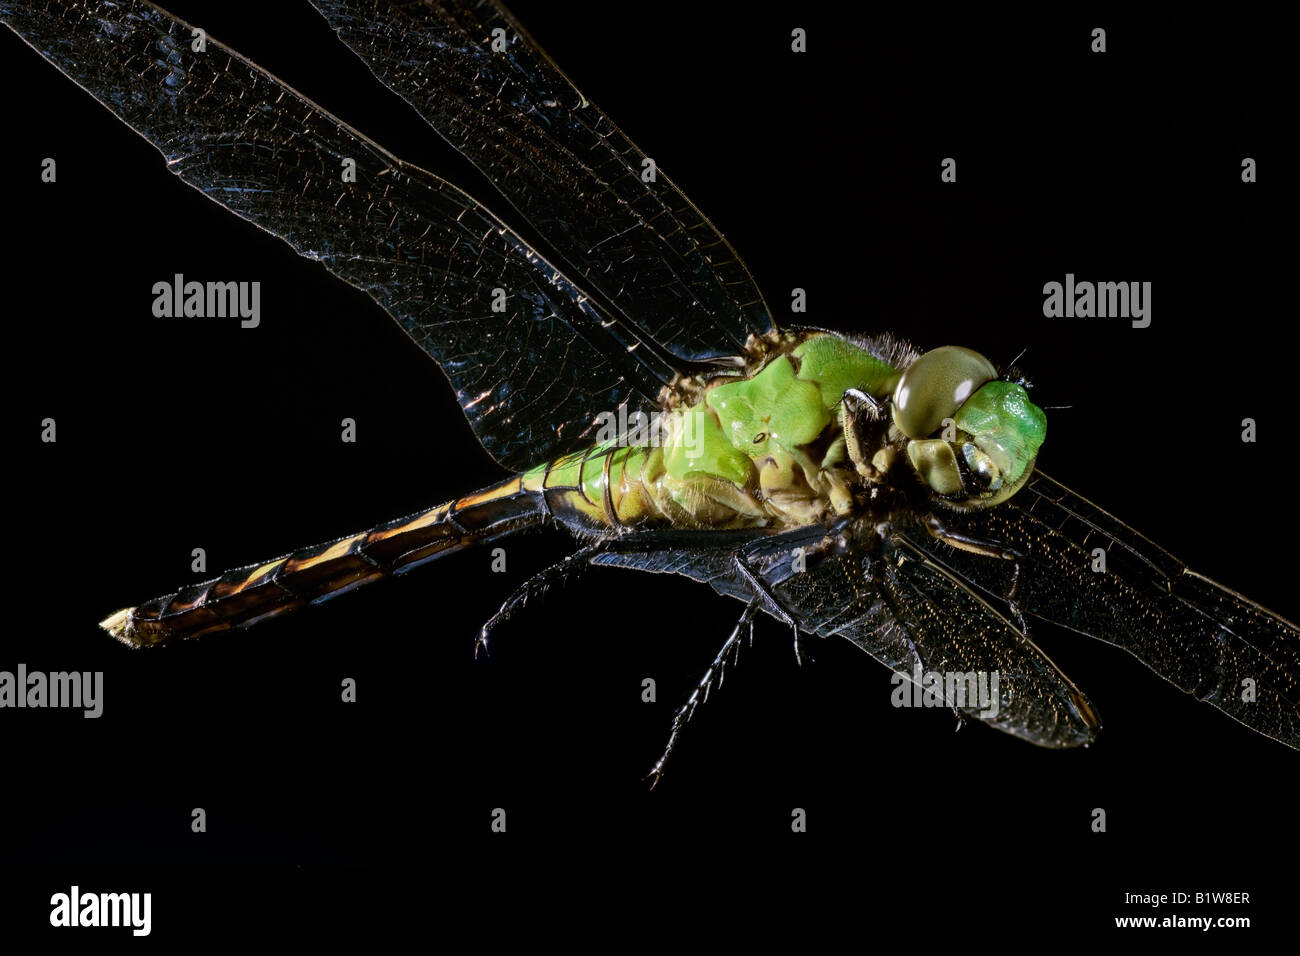 Female Green Clearwing Dragonfly Erythemis simplicicollis Stock Photo